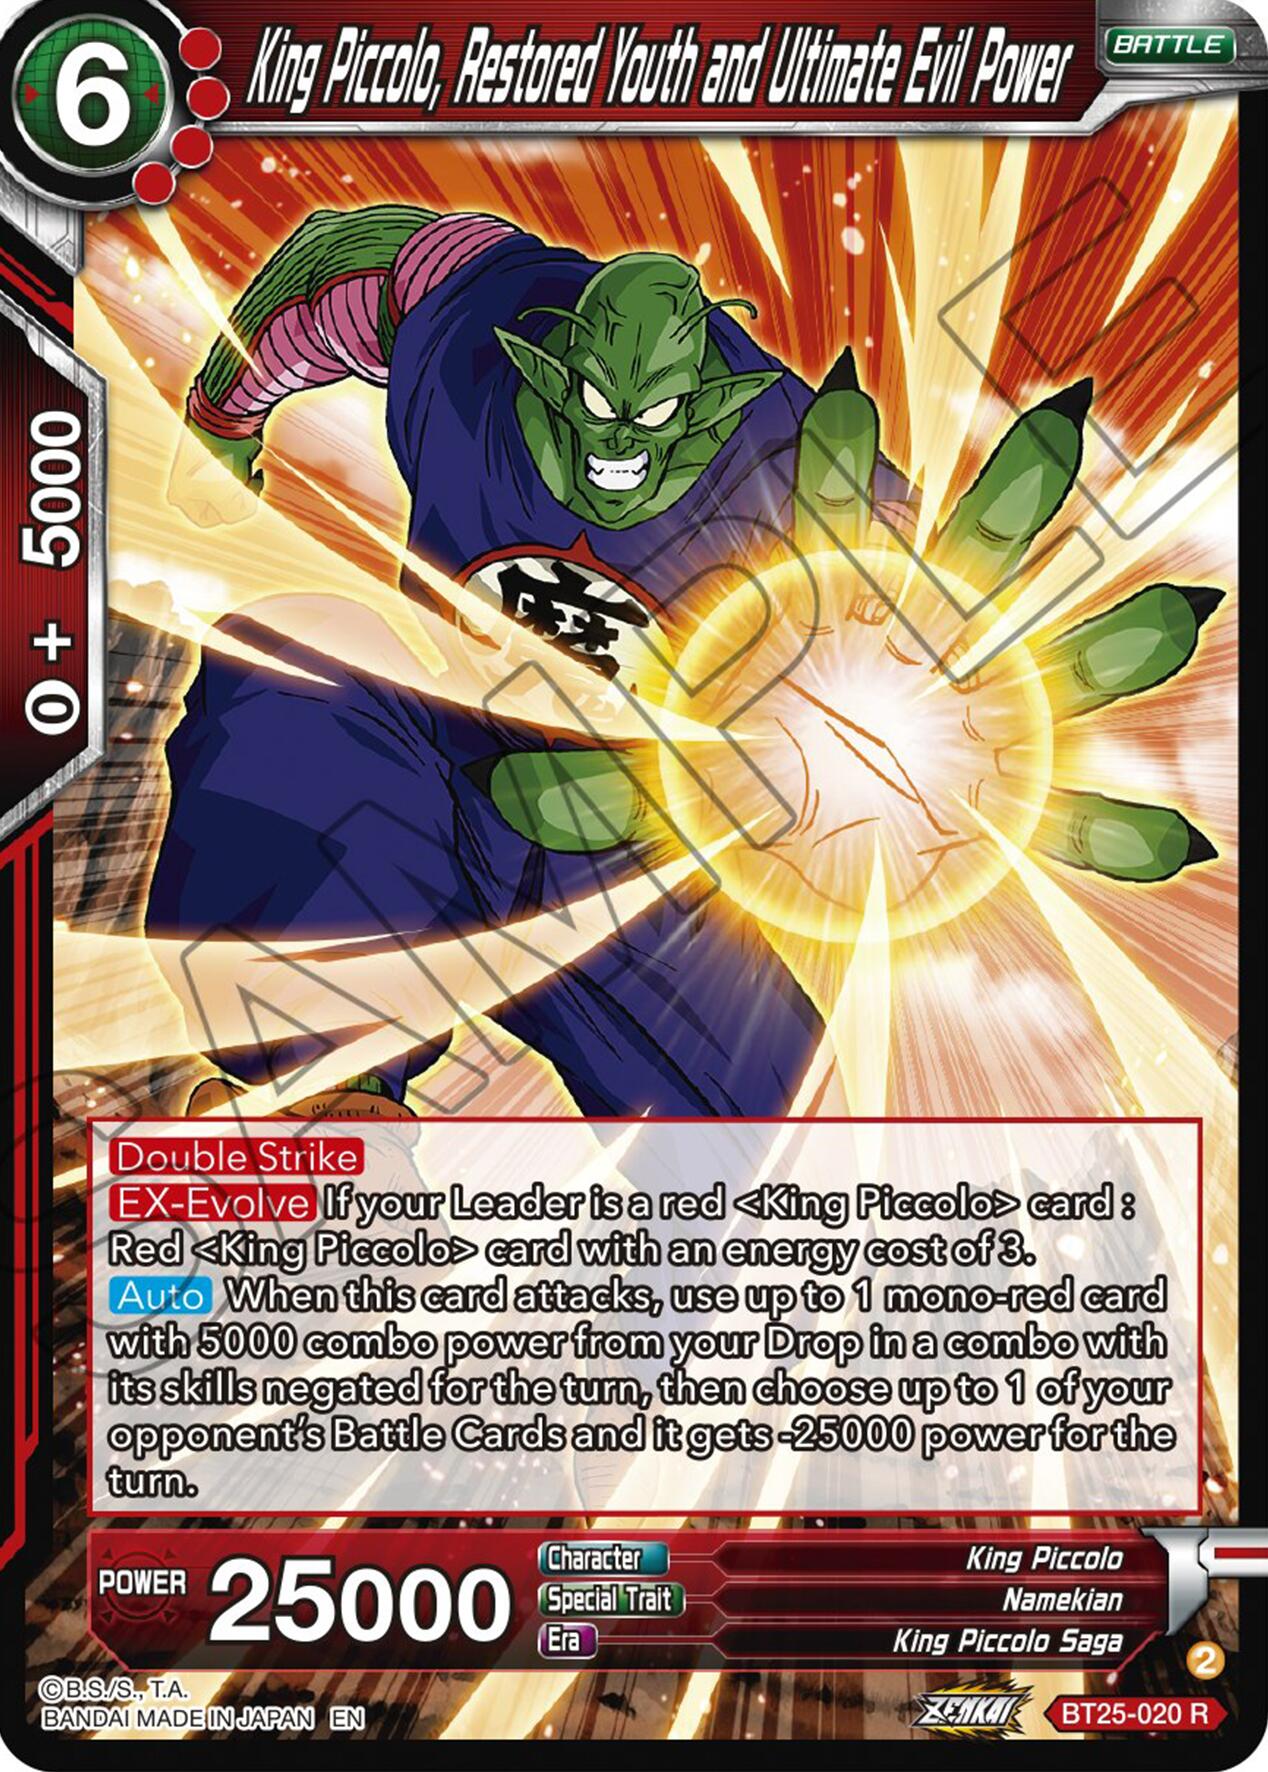 King Piccolo, Restored Youth and Ultimate Evil Power (BT25-020) [Legend of the Dragon Balls] | Black Swamp Games